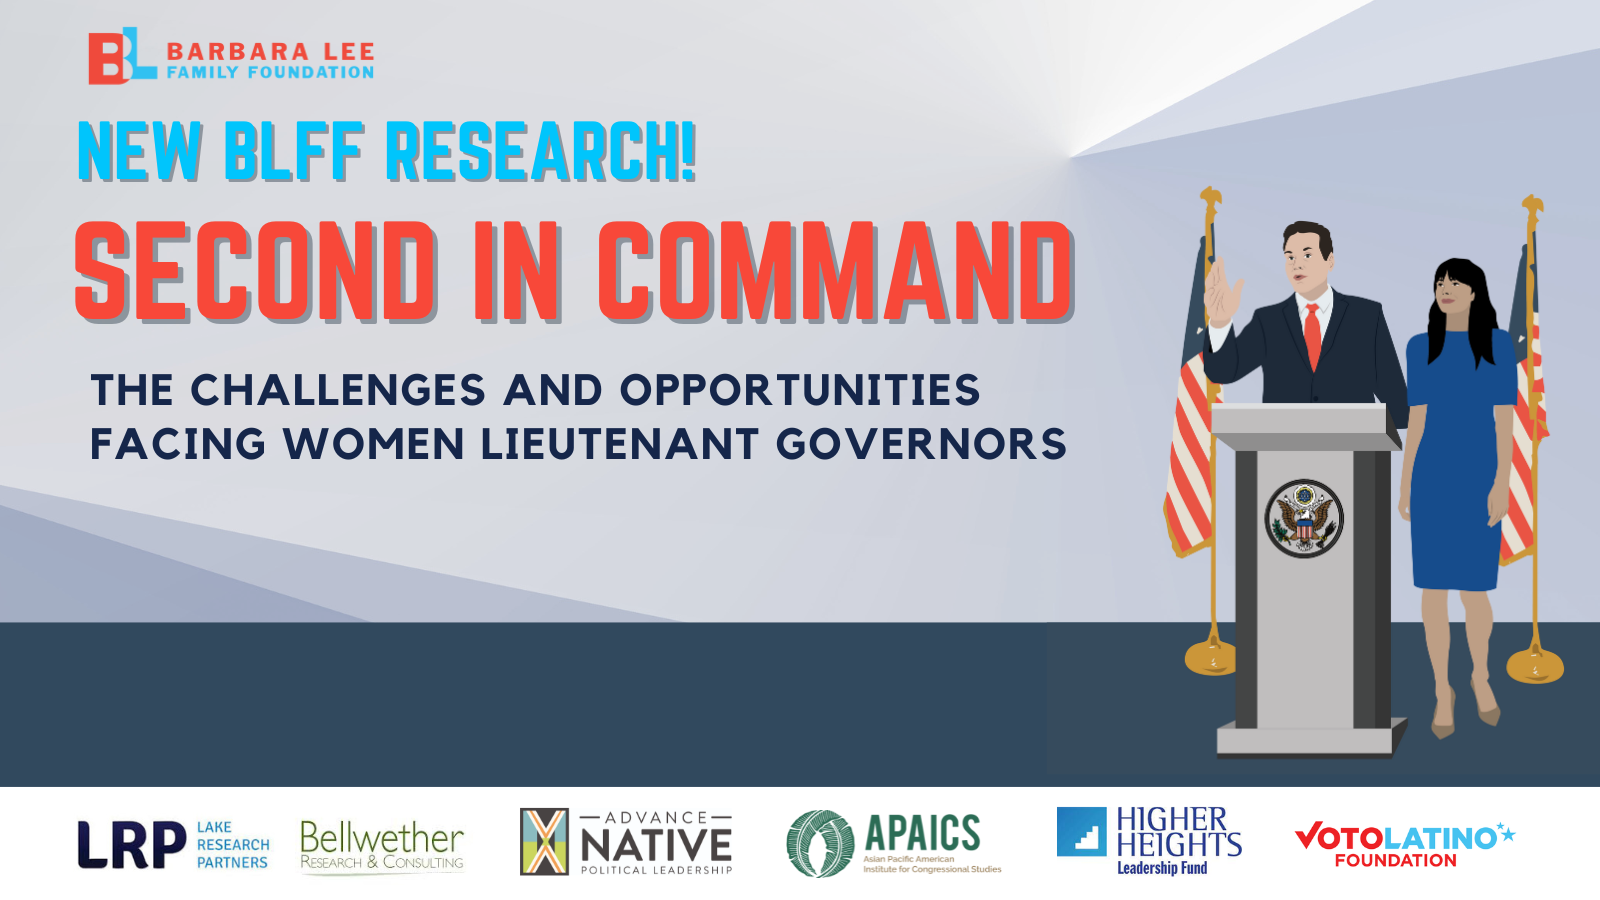 New BLFF Research about Women Lieutenant Governors